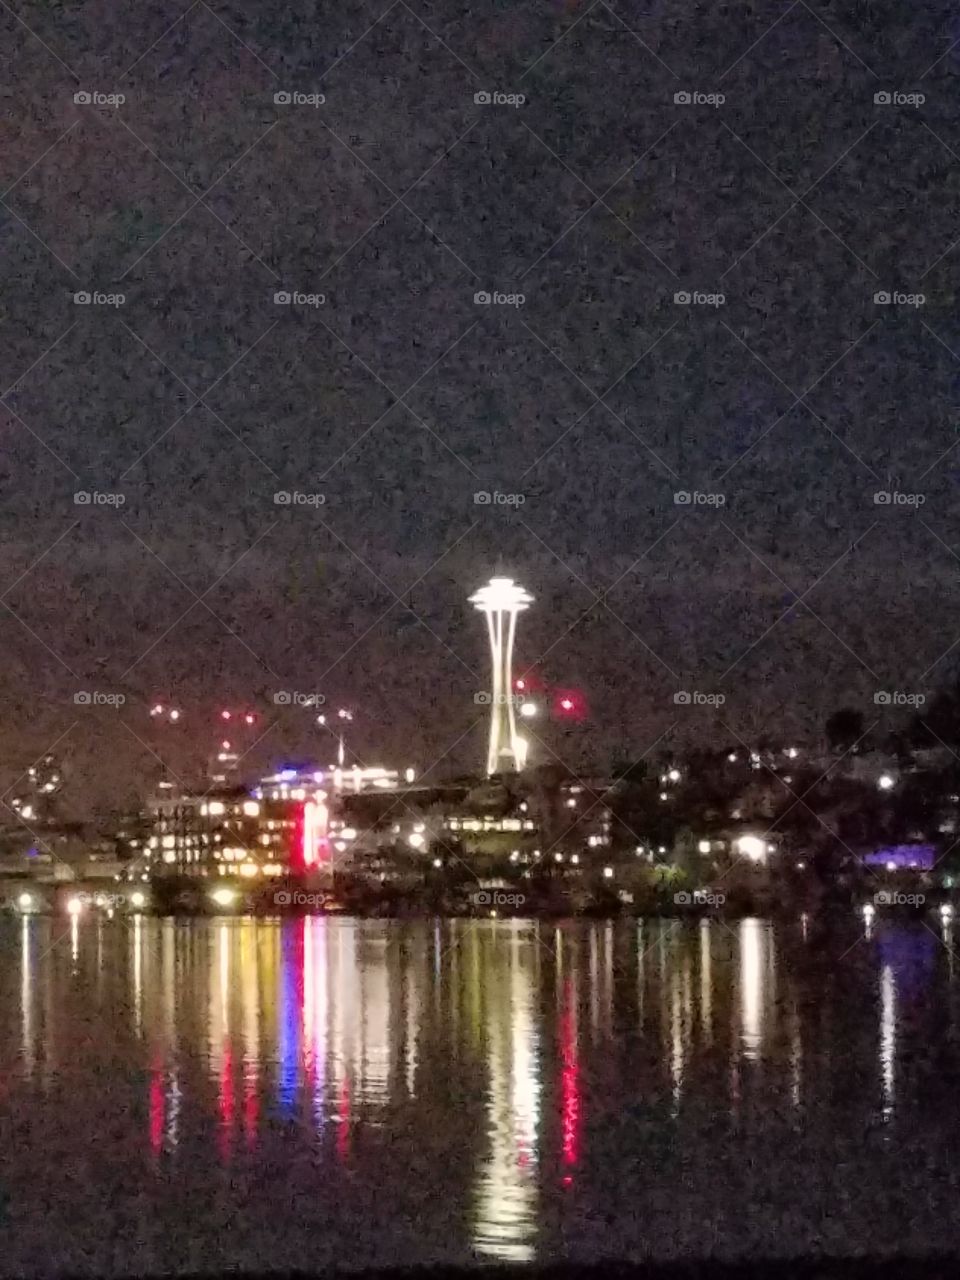 zoom in of Seattle space needle at night, unfortunately a bit grainy 5/21/2016